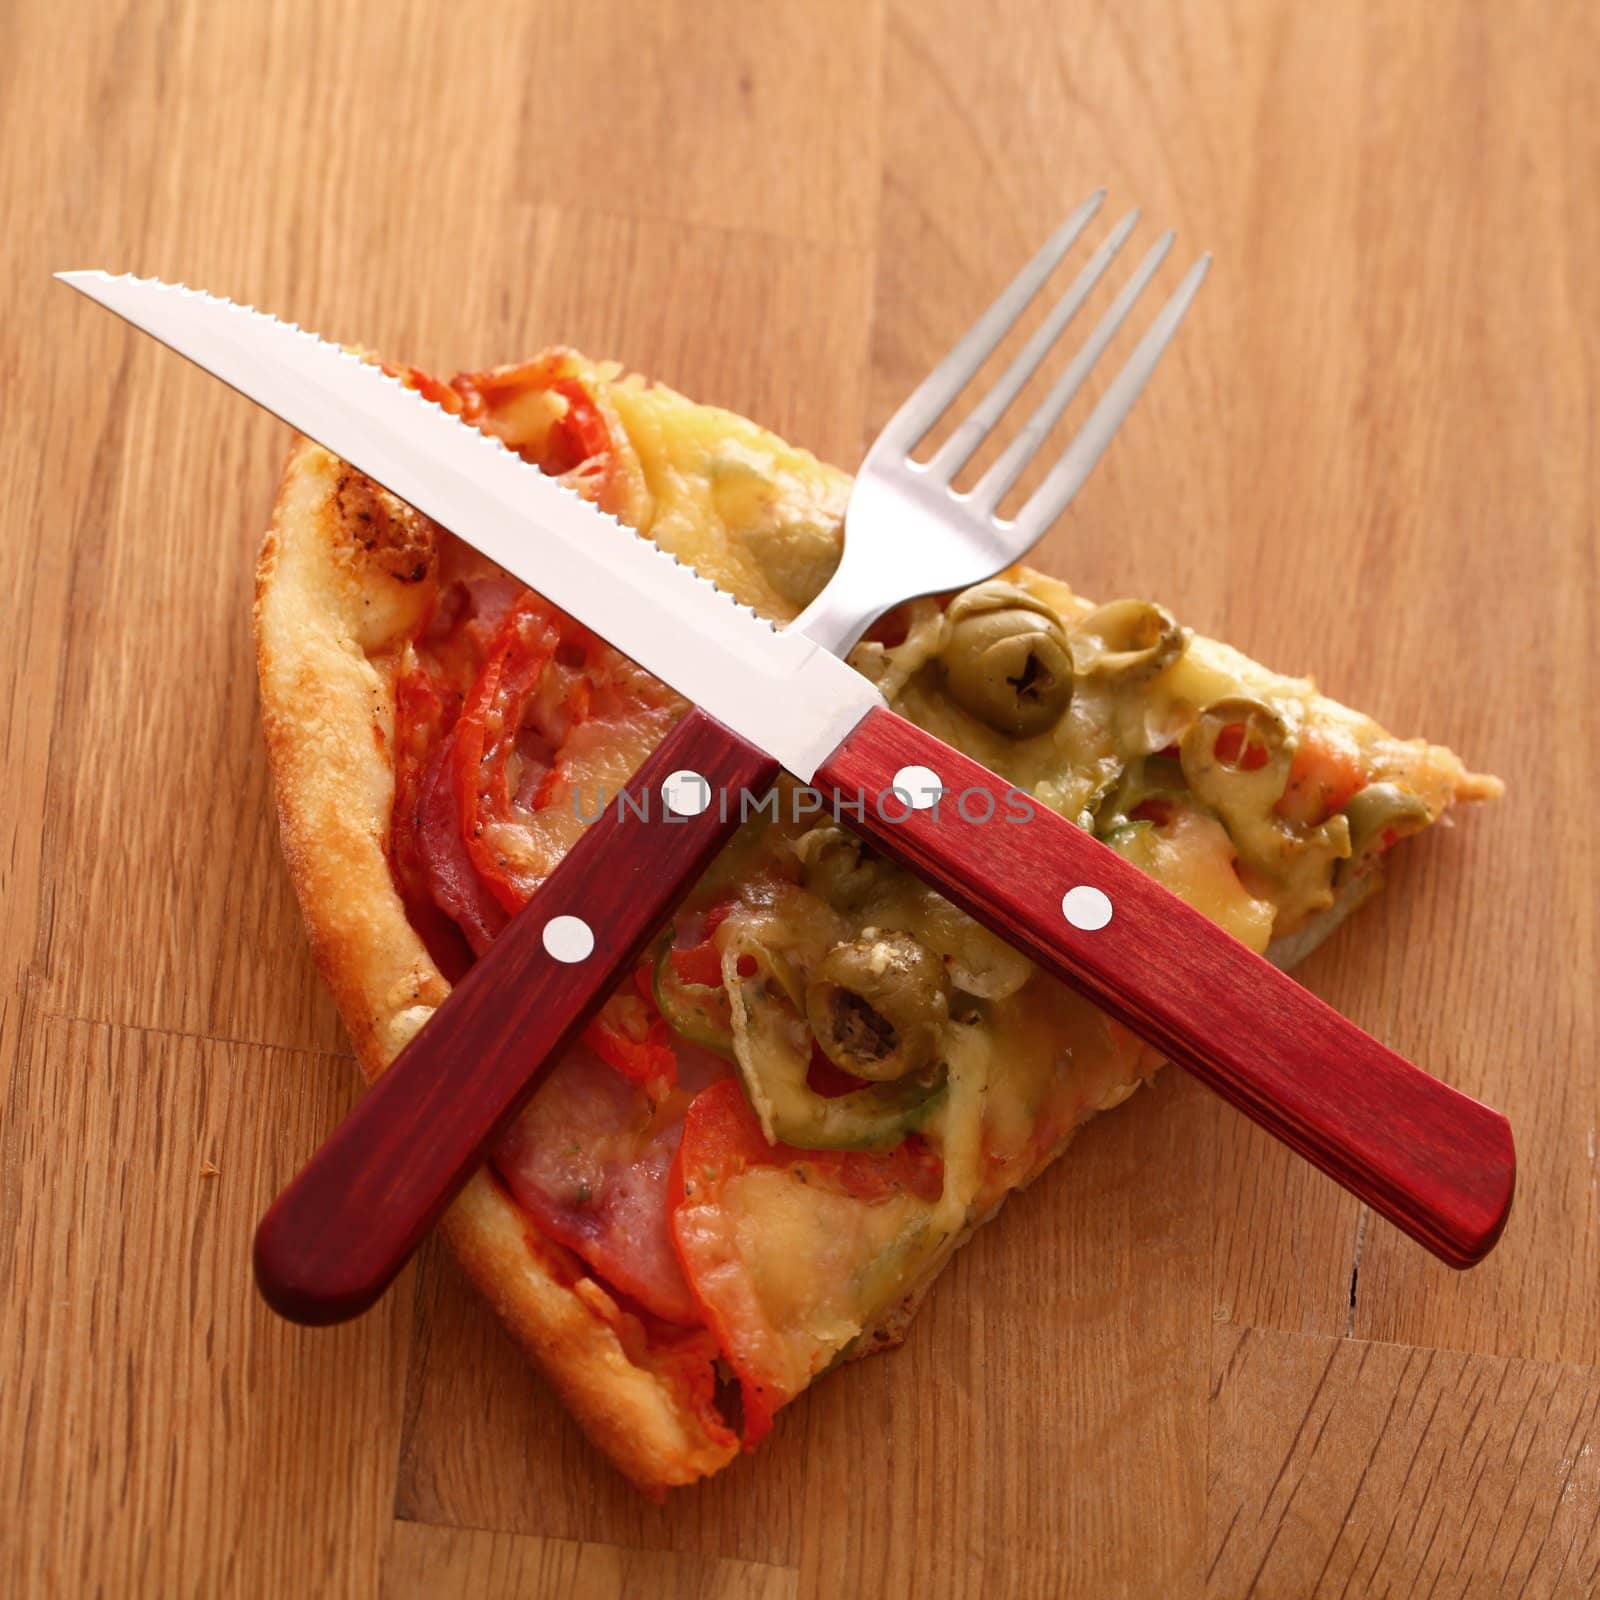 Slice of fesh italian pizza with fox and knife over wooden background